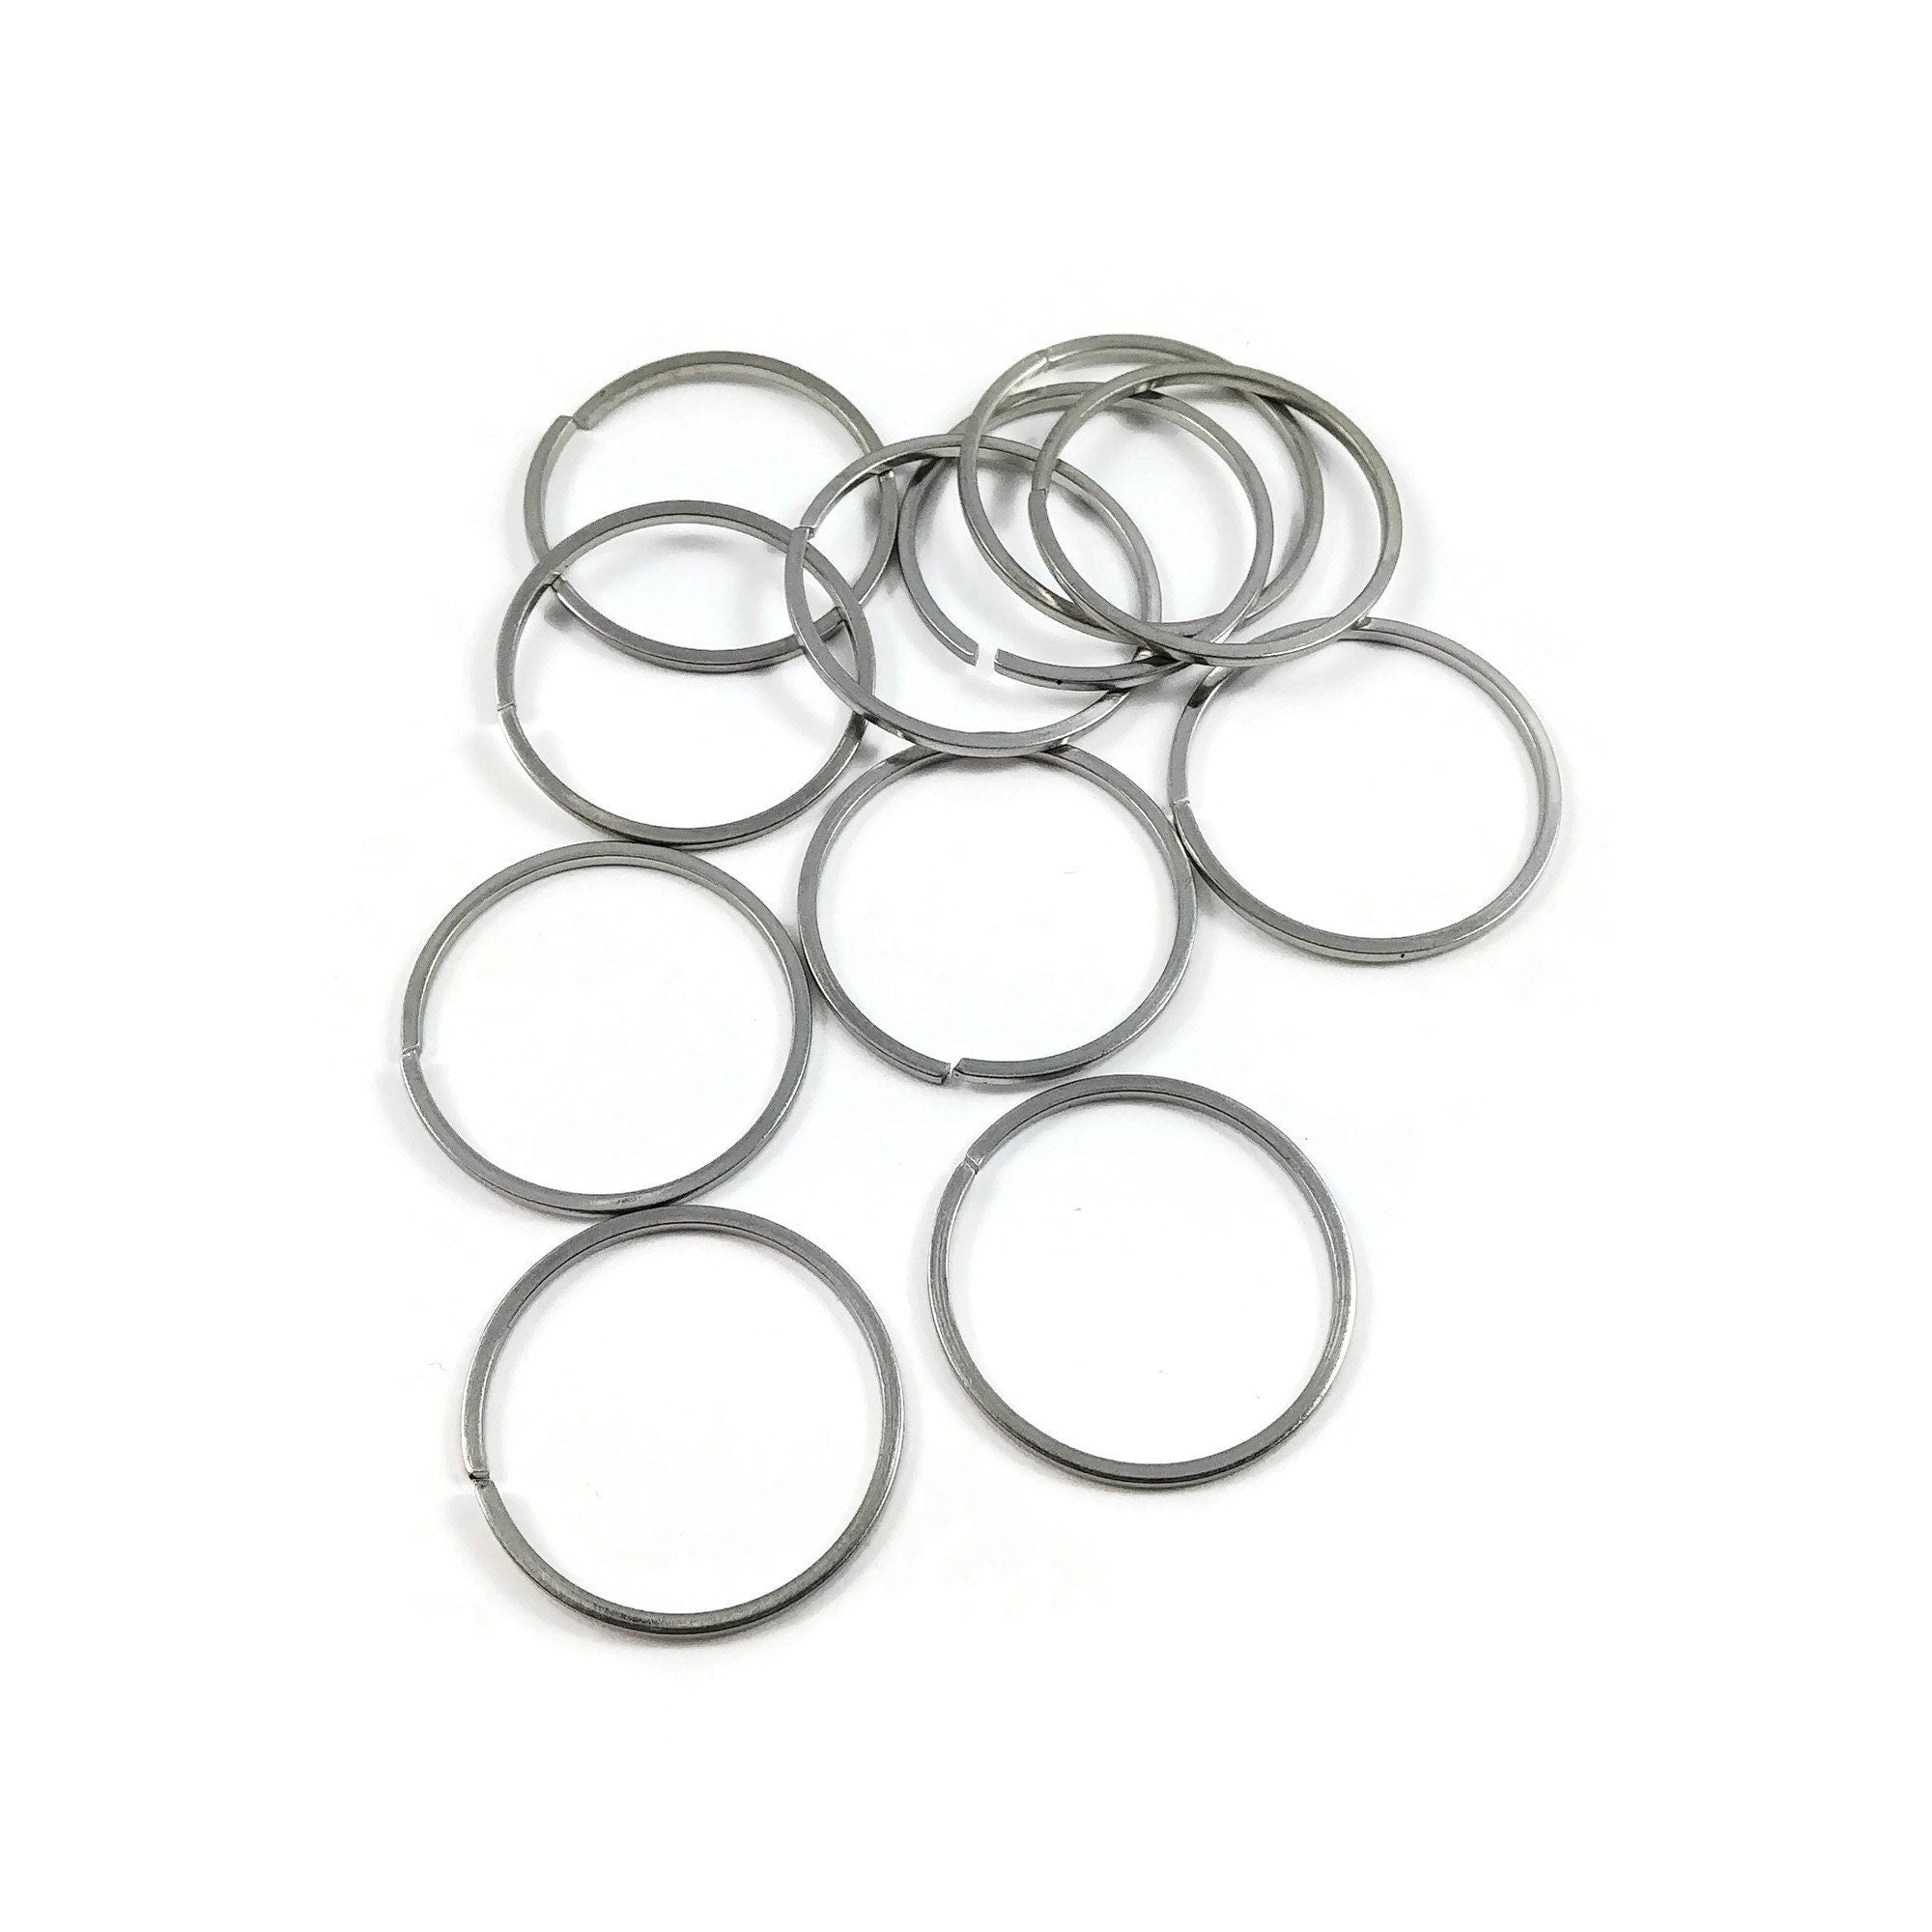 Silver Plated Open Jump Rings Oval 4x6mm 20 Gauge (50 pcs